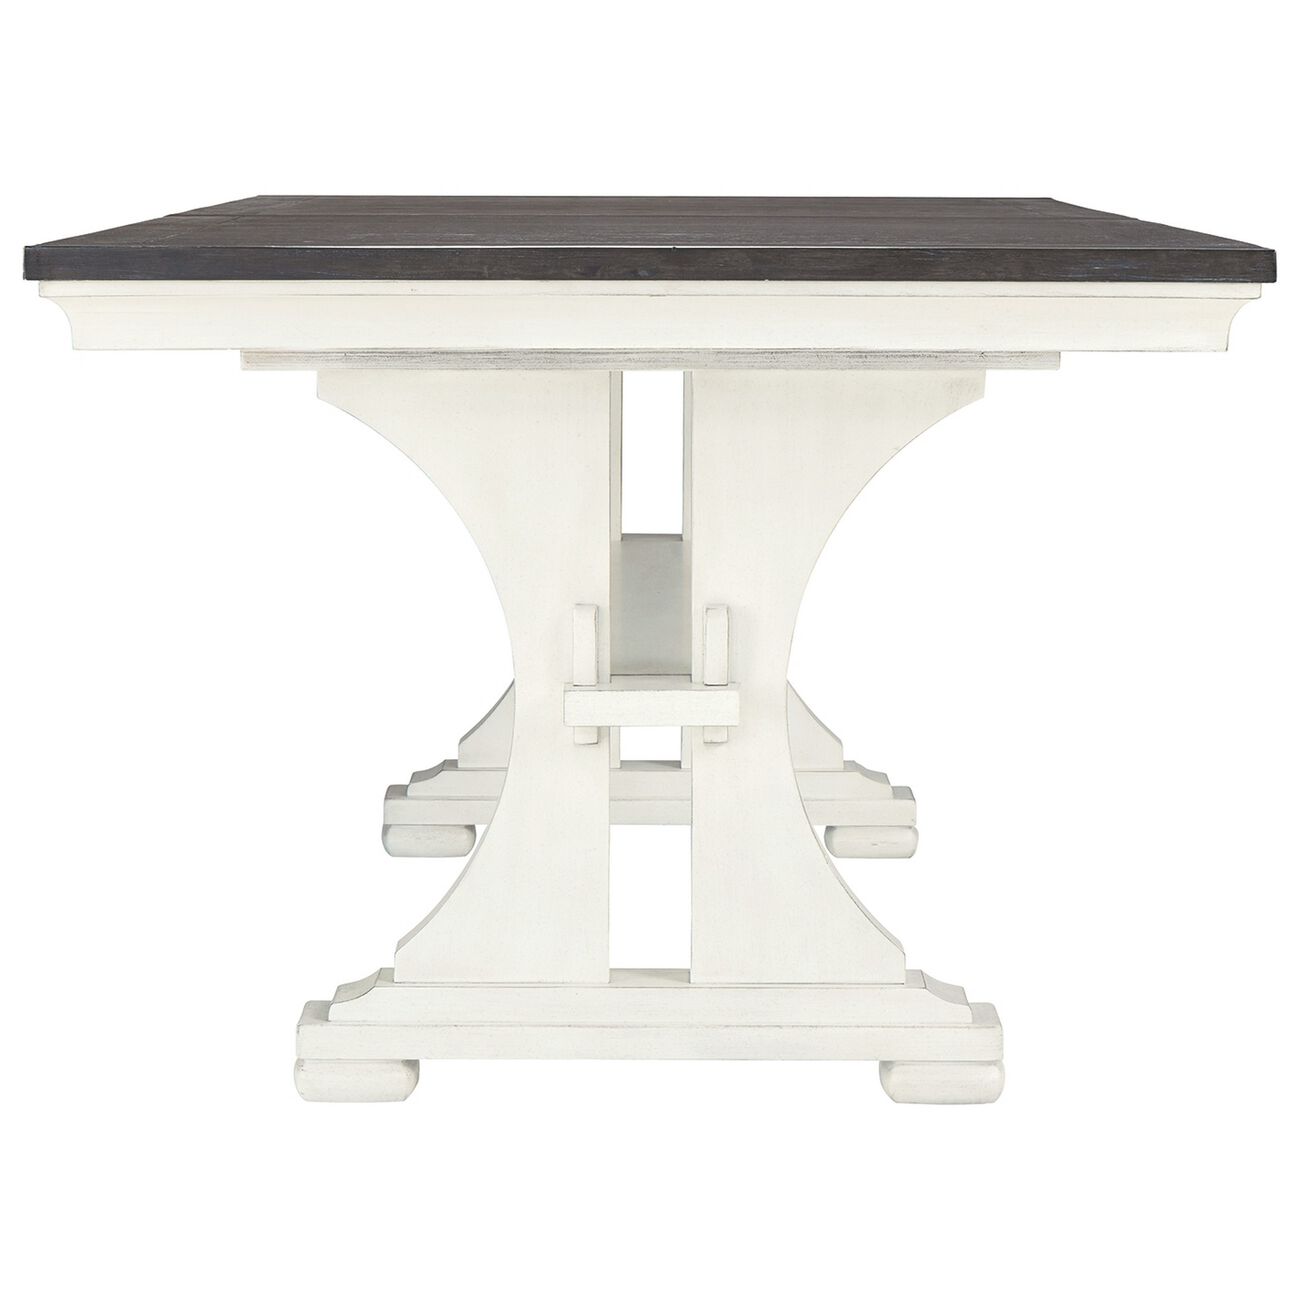 Rectangular Extendable Dining Table with Trestle Base, Brown and White